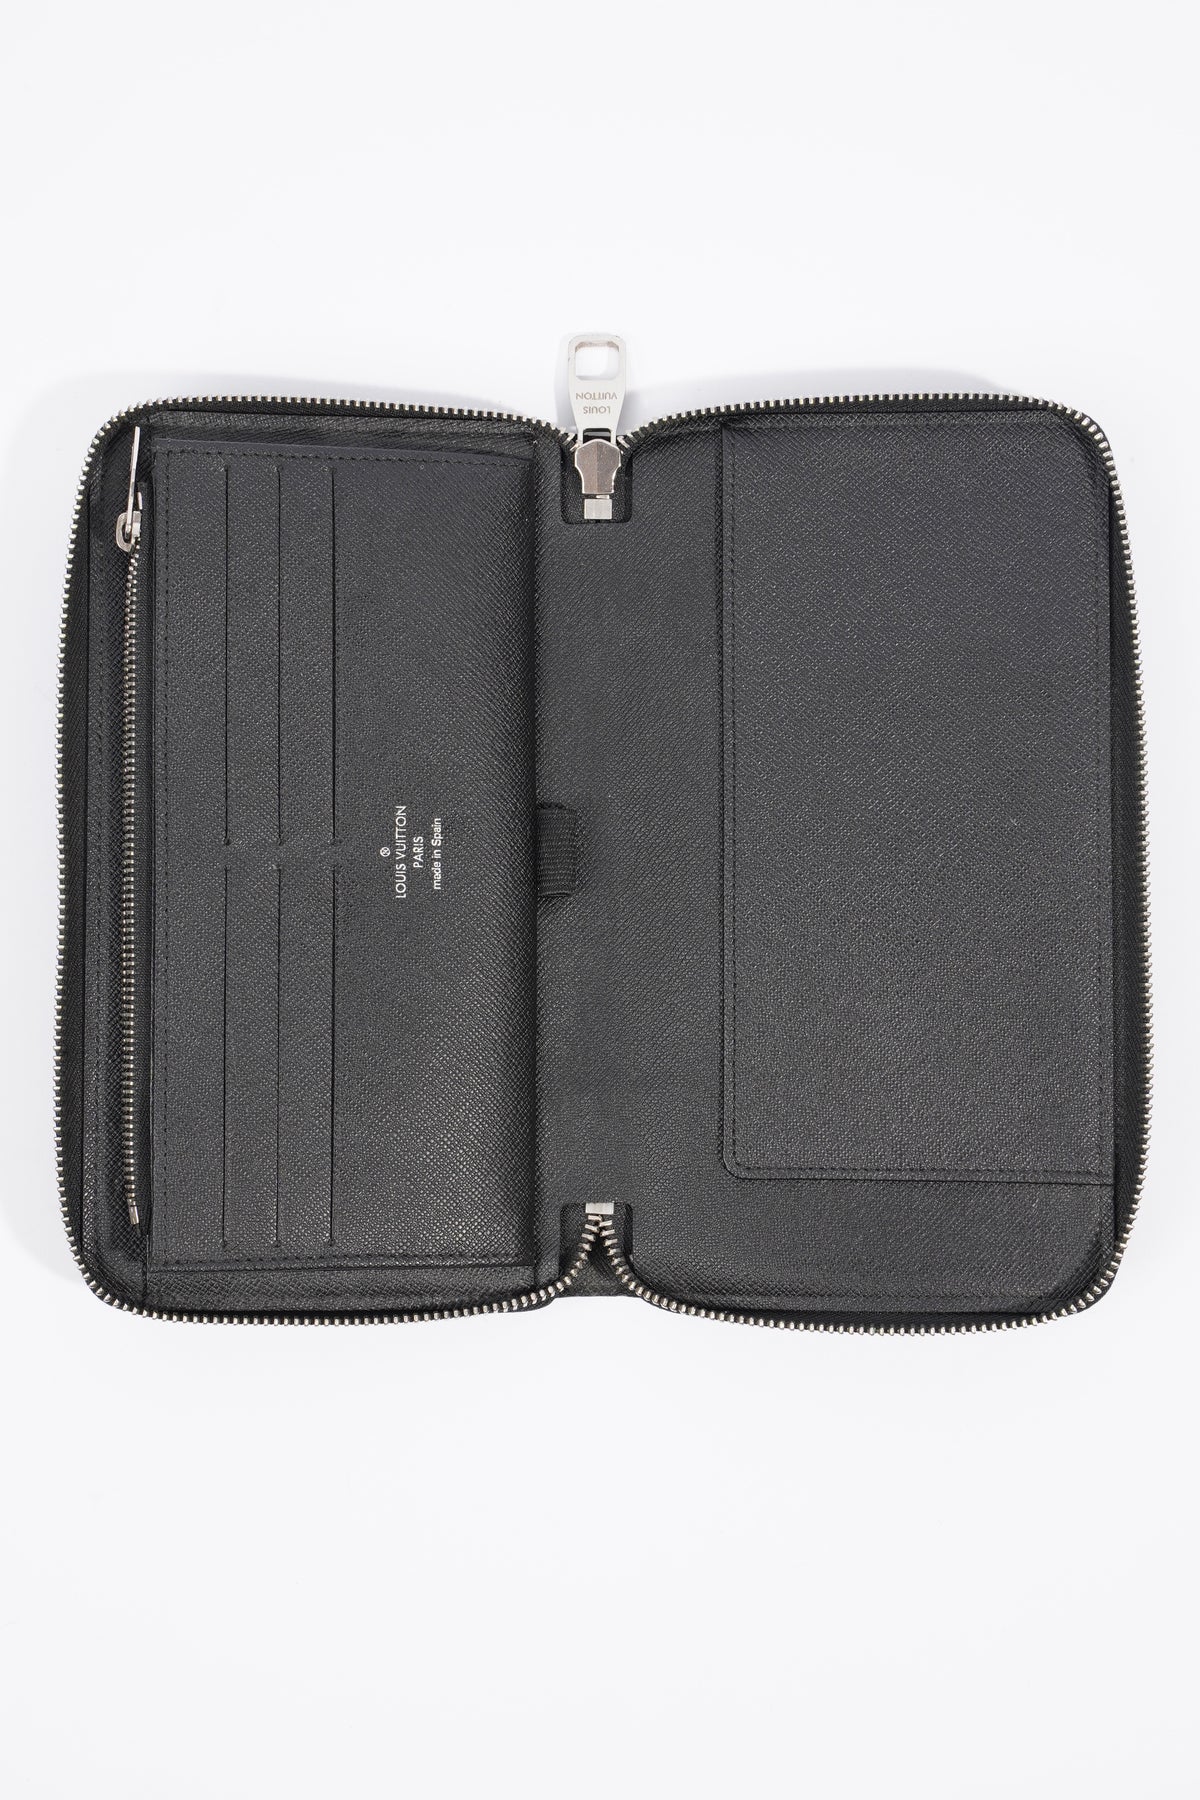 Zippy Organiser Damier Graphite Canvas - Wallets and Small Leather